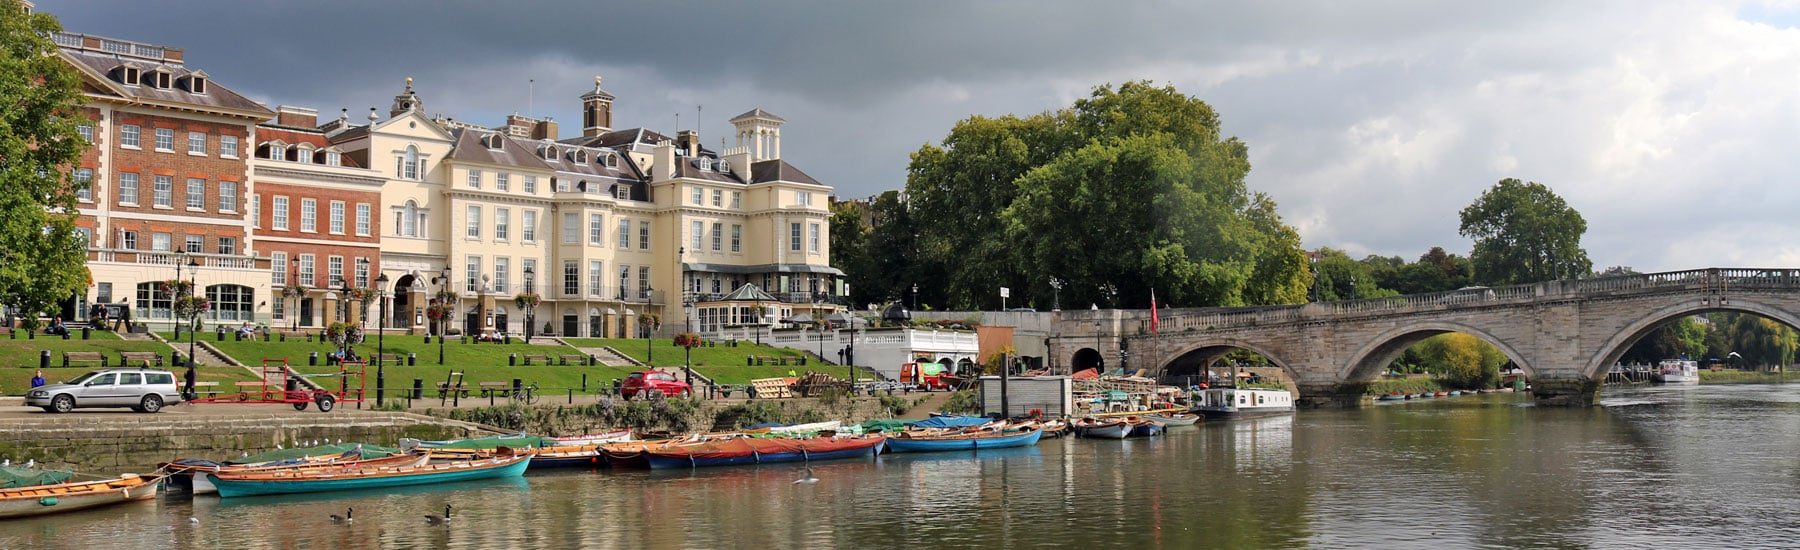 The Riverfront at Richmond on Thames